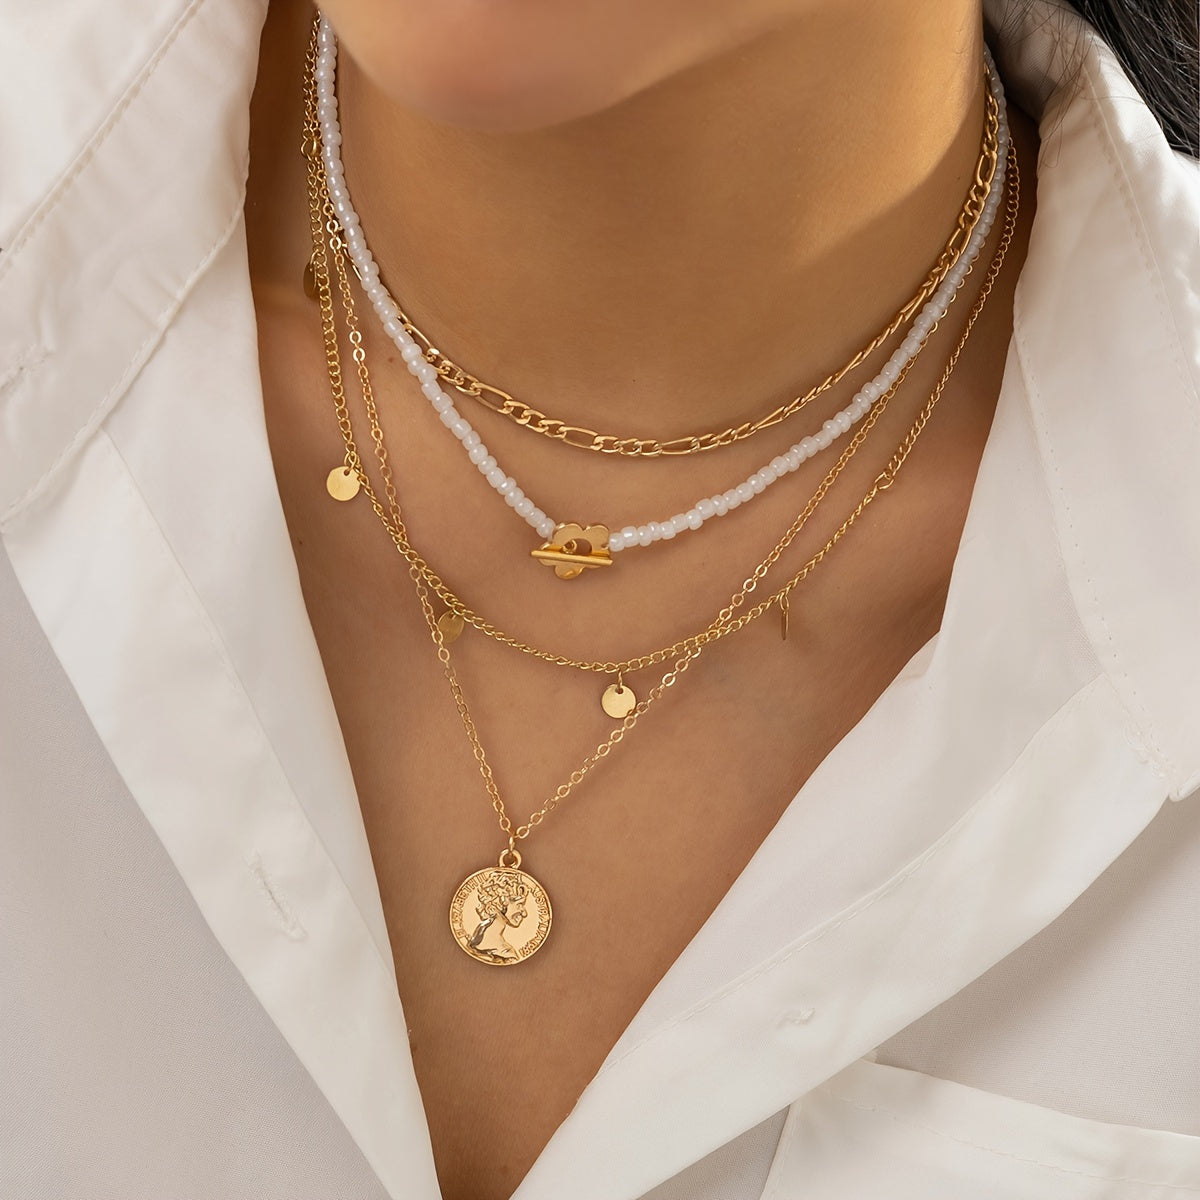 Gorgeous Multi-Layer Chain Necklace with Coin Pendant - Perfect Graduation Gift for Women!